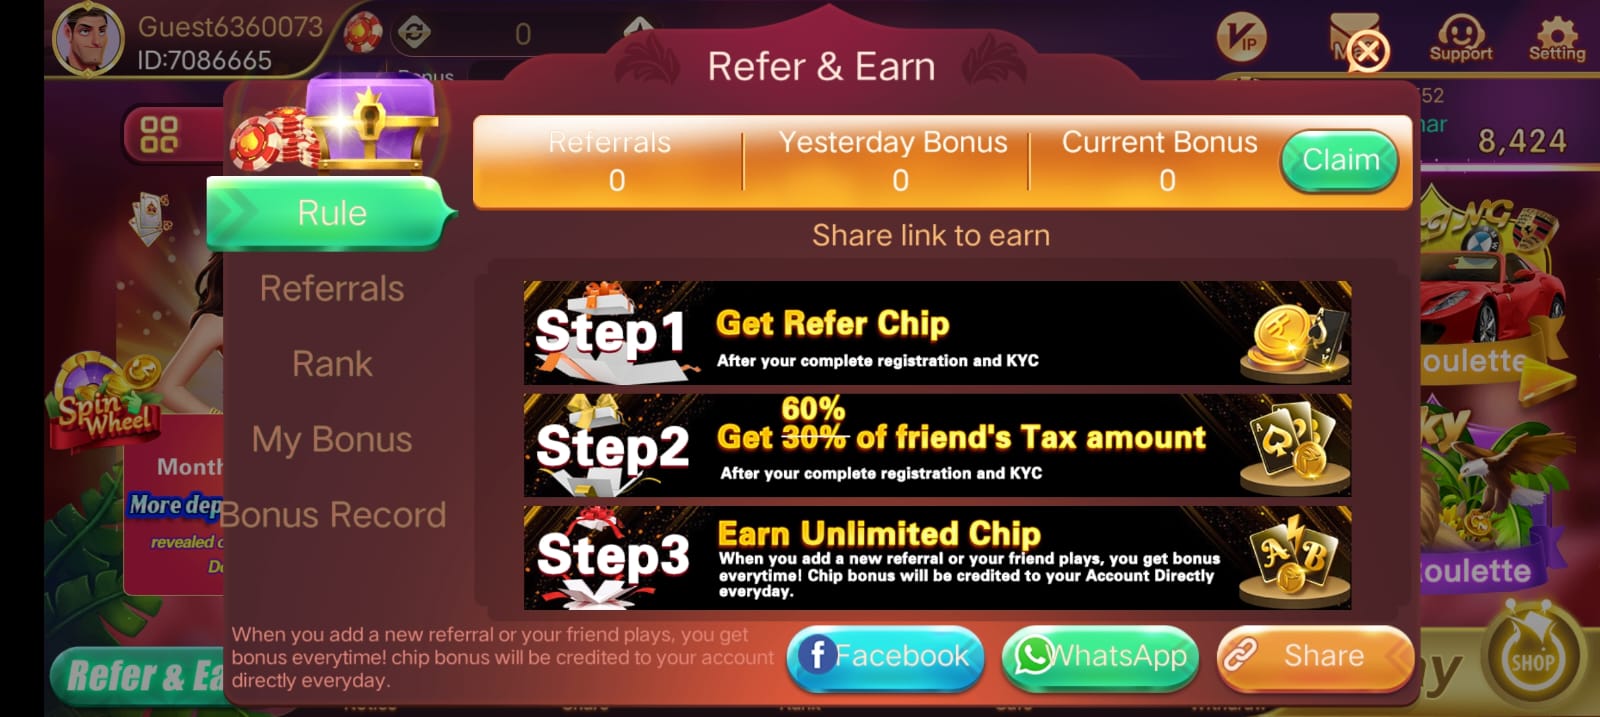 REFER AND EARN IN TEEN PATTI APP